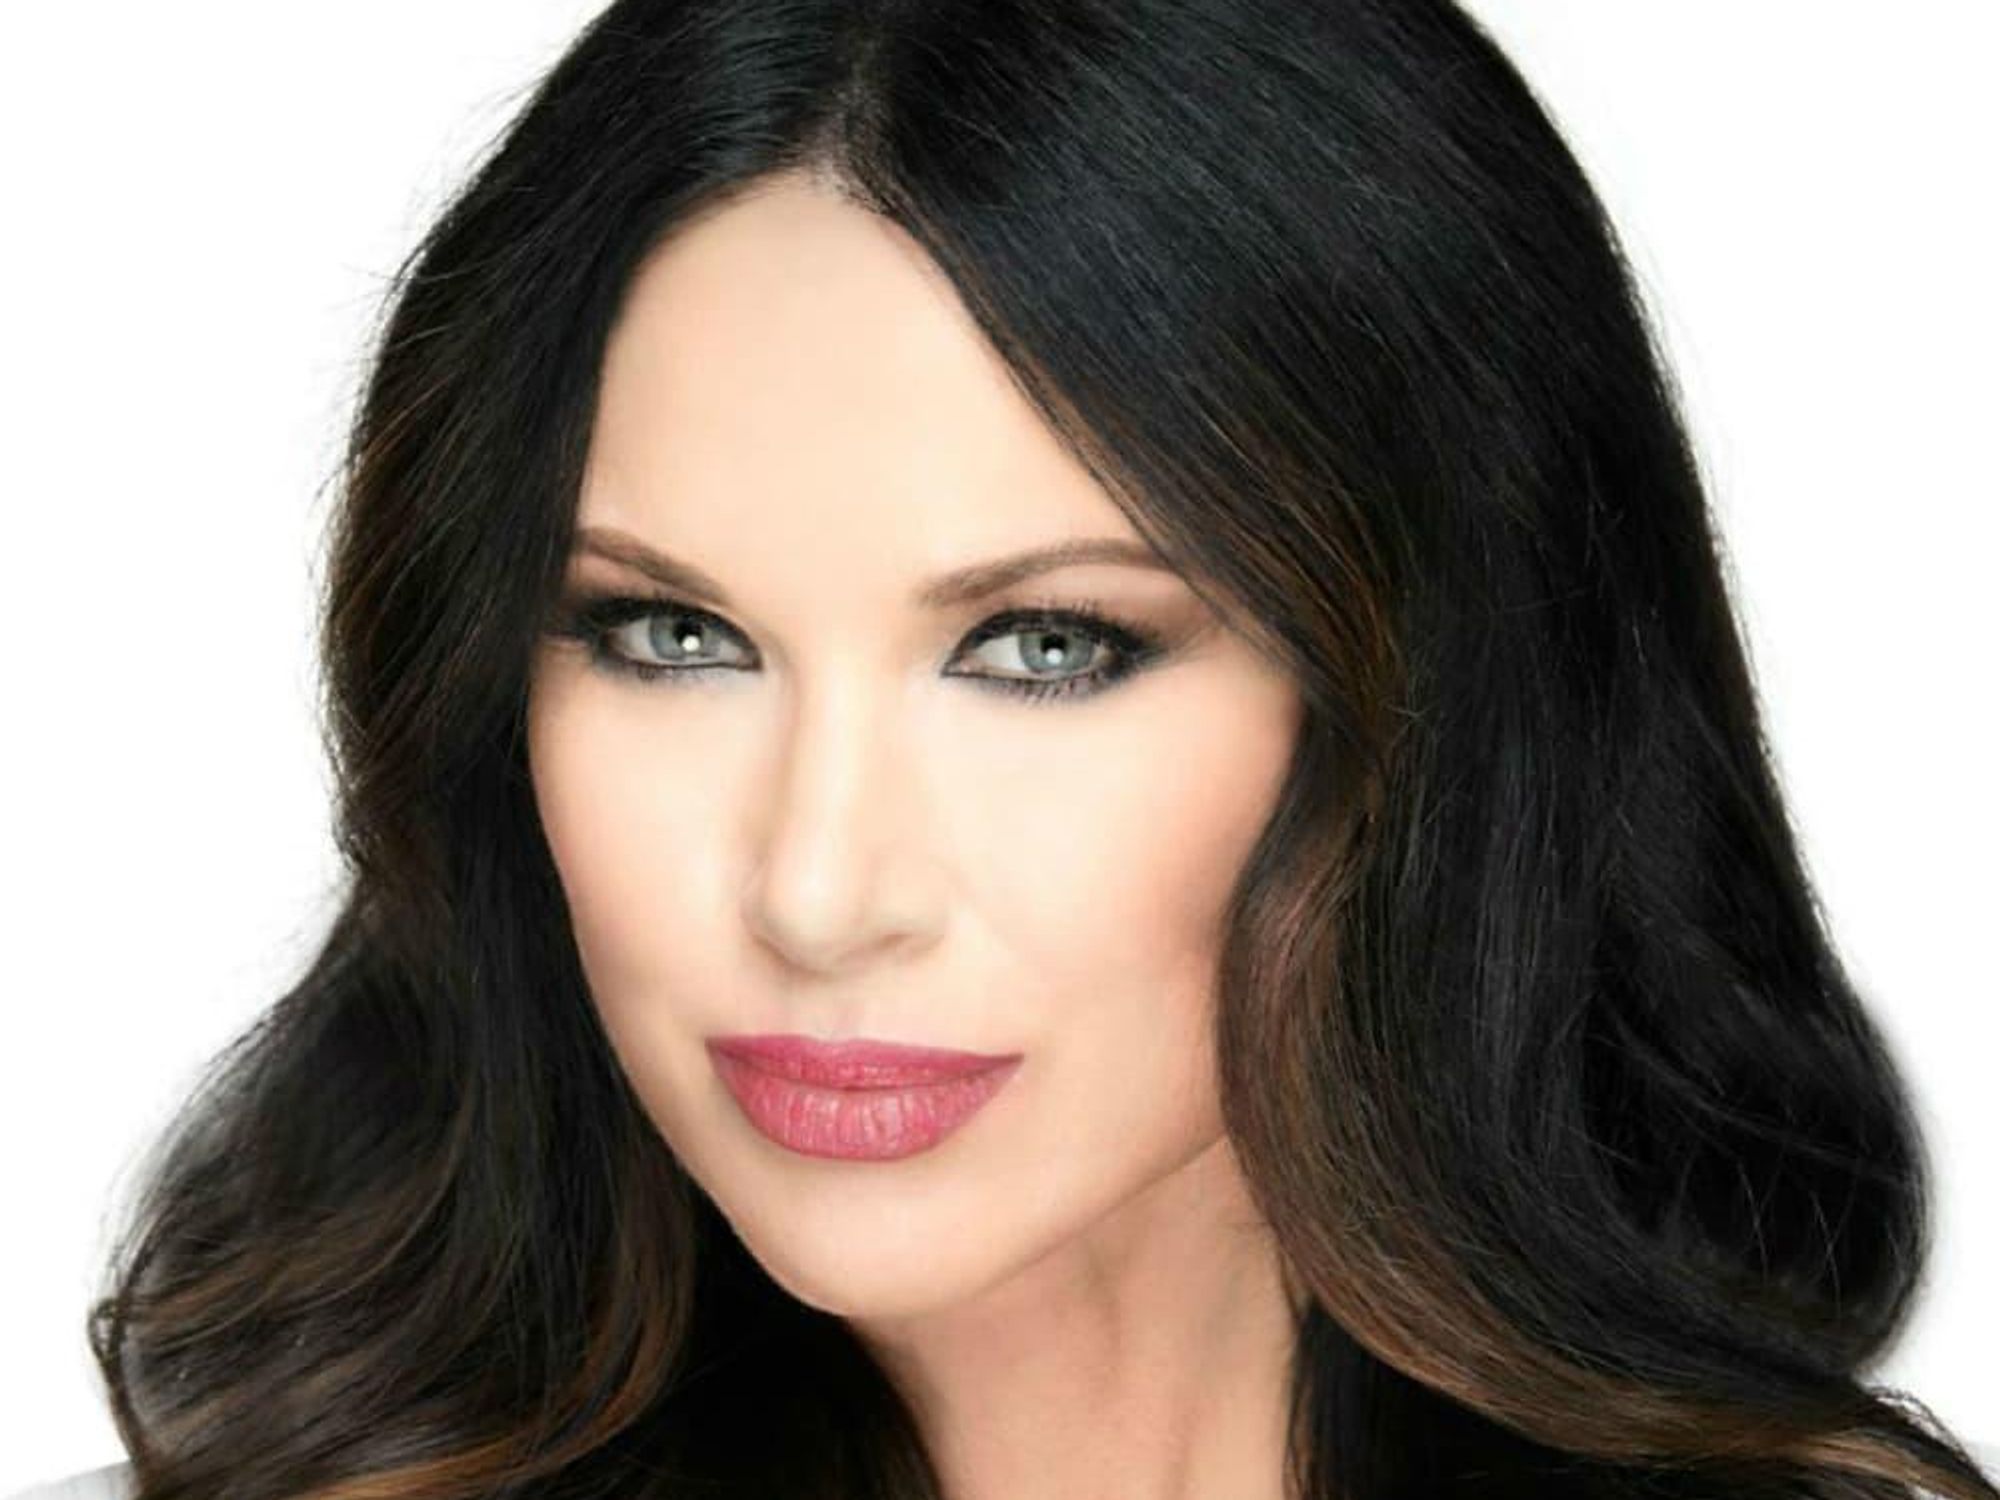 LeeAnne Locken from Real Housewives of Dallas